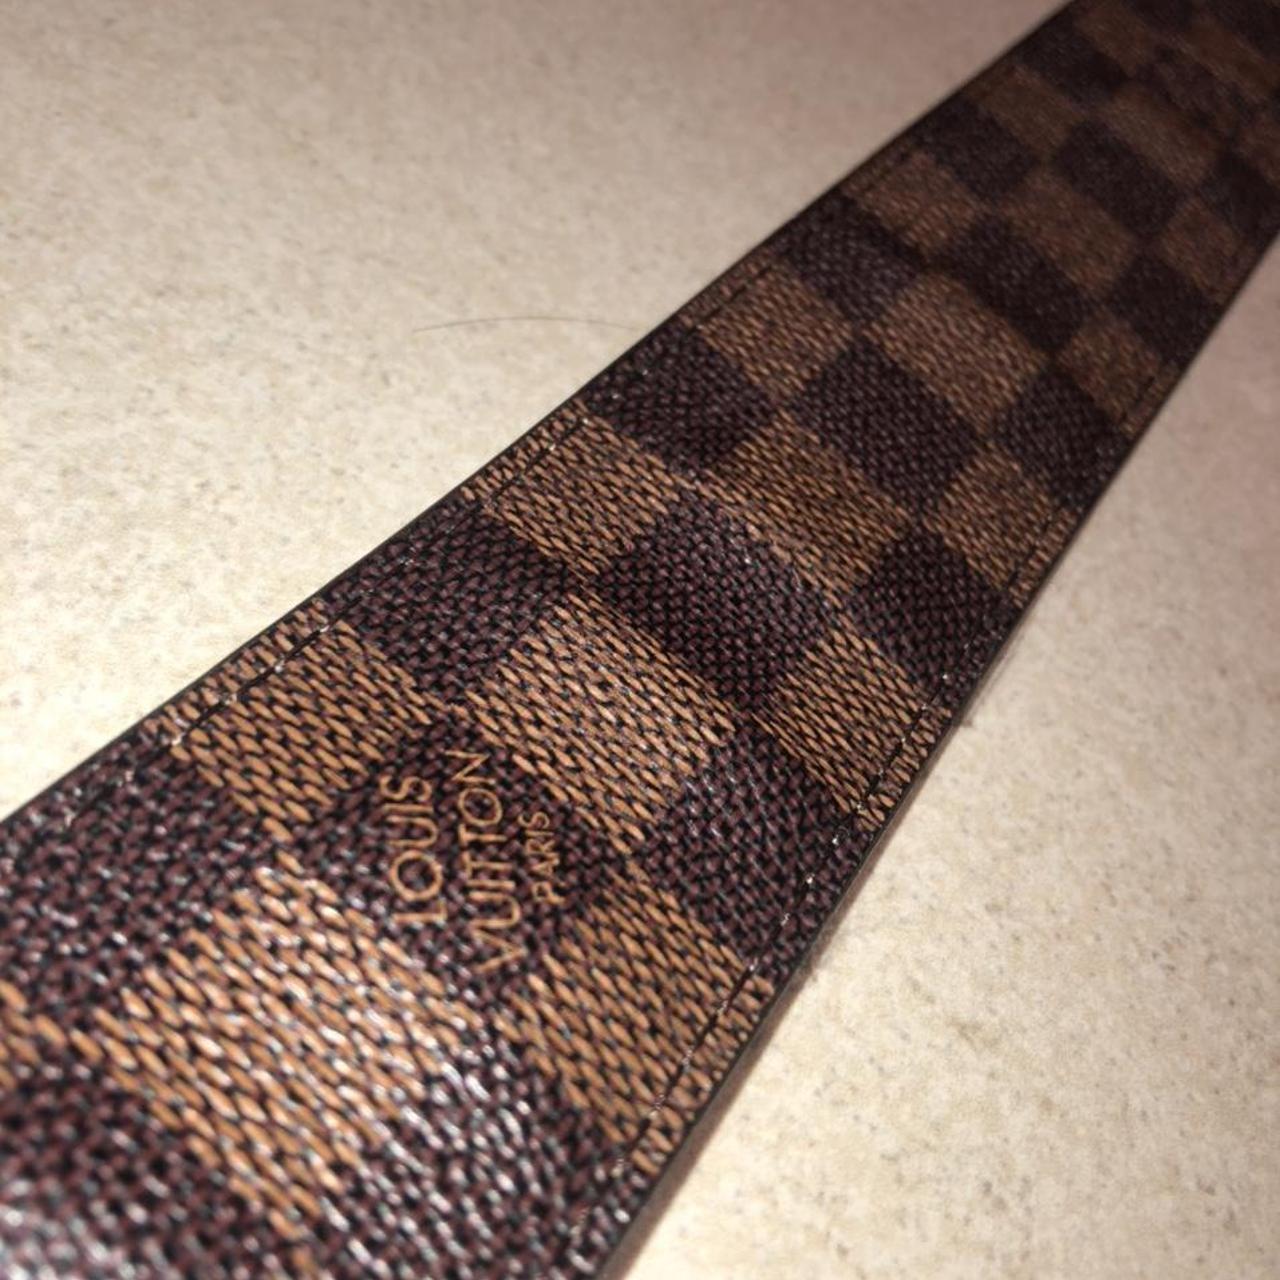 Selling my Louis Vuitton belt as I want the brown - Depop